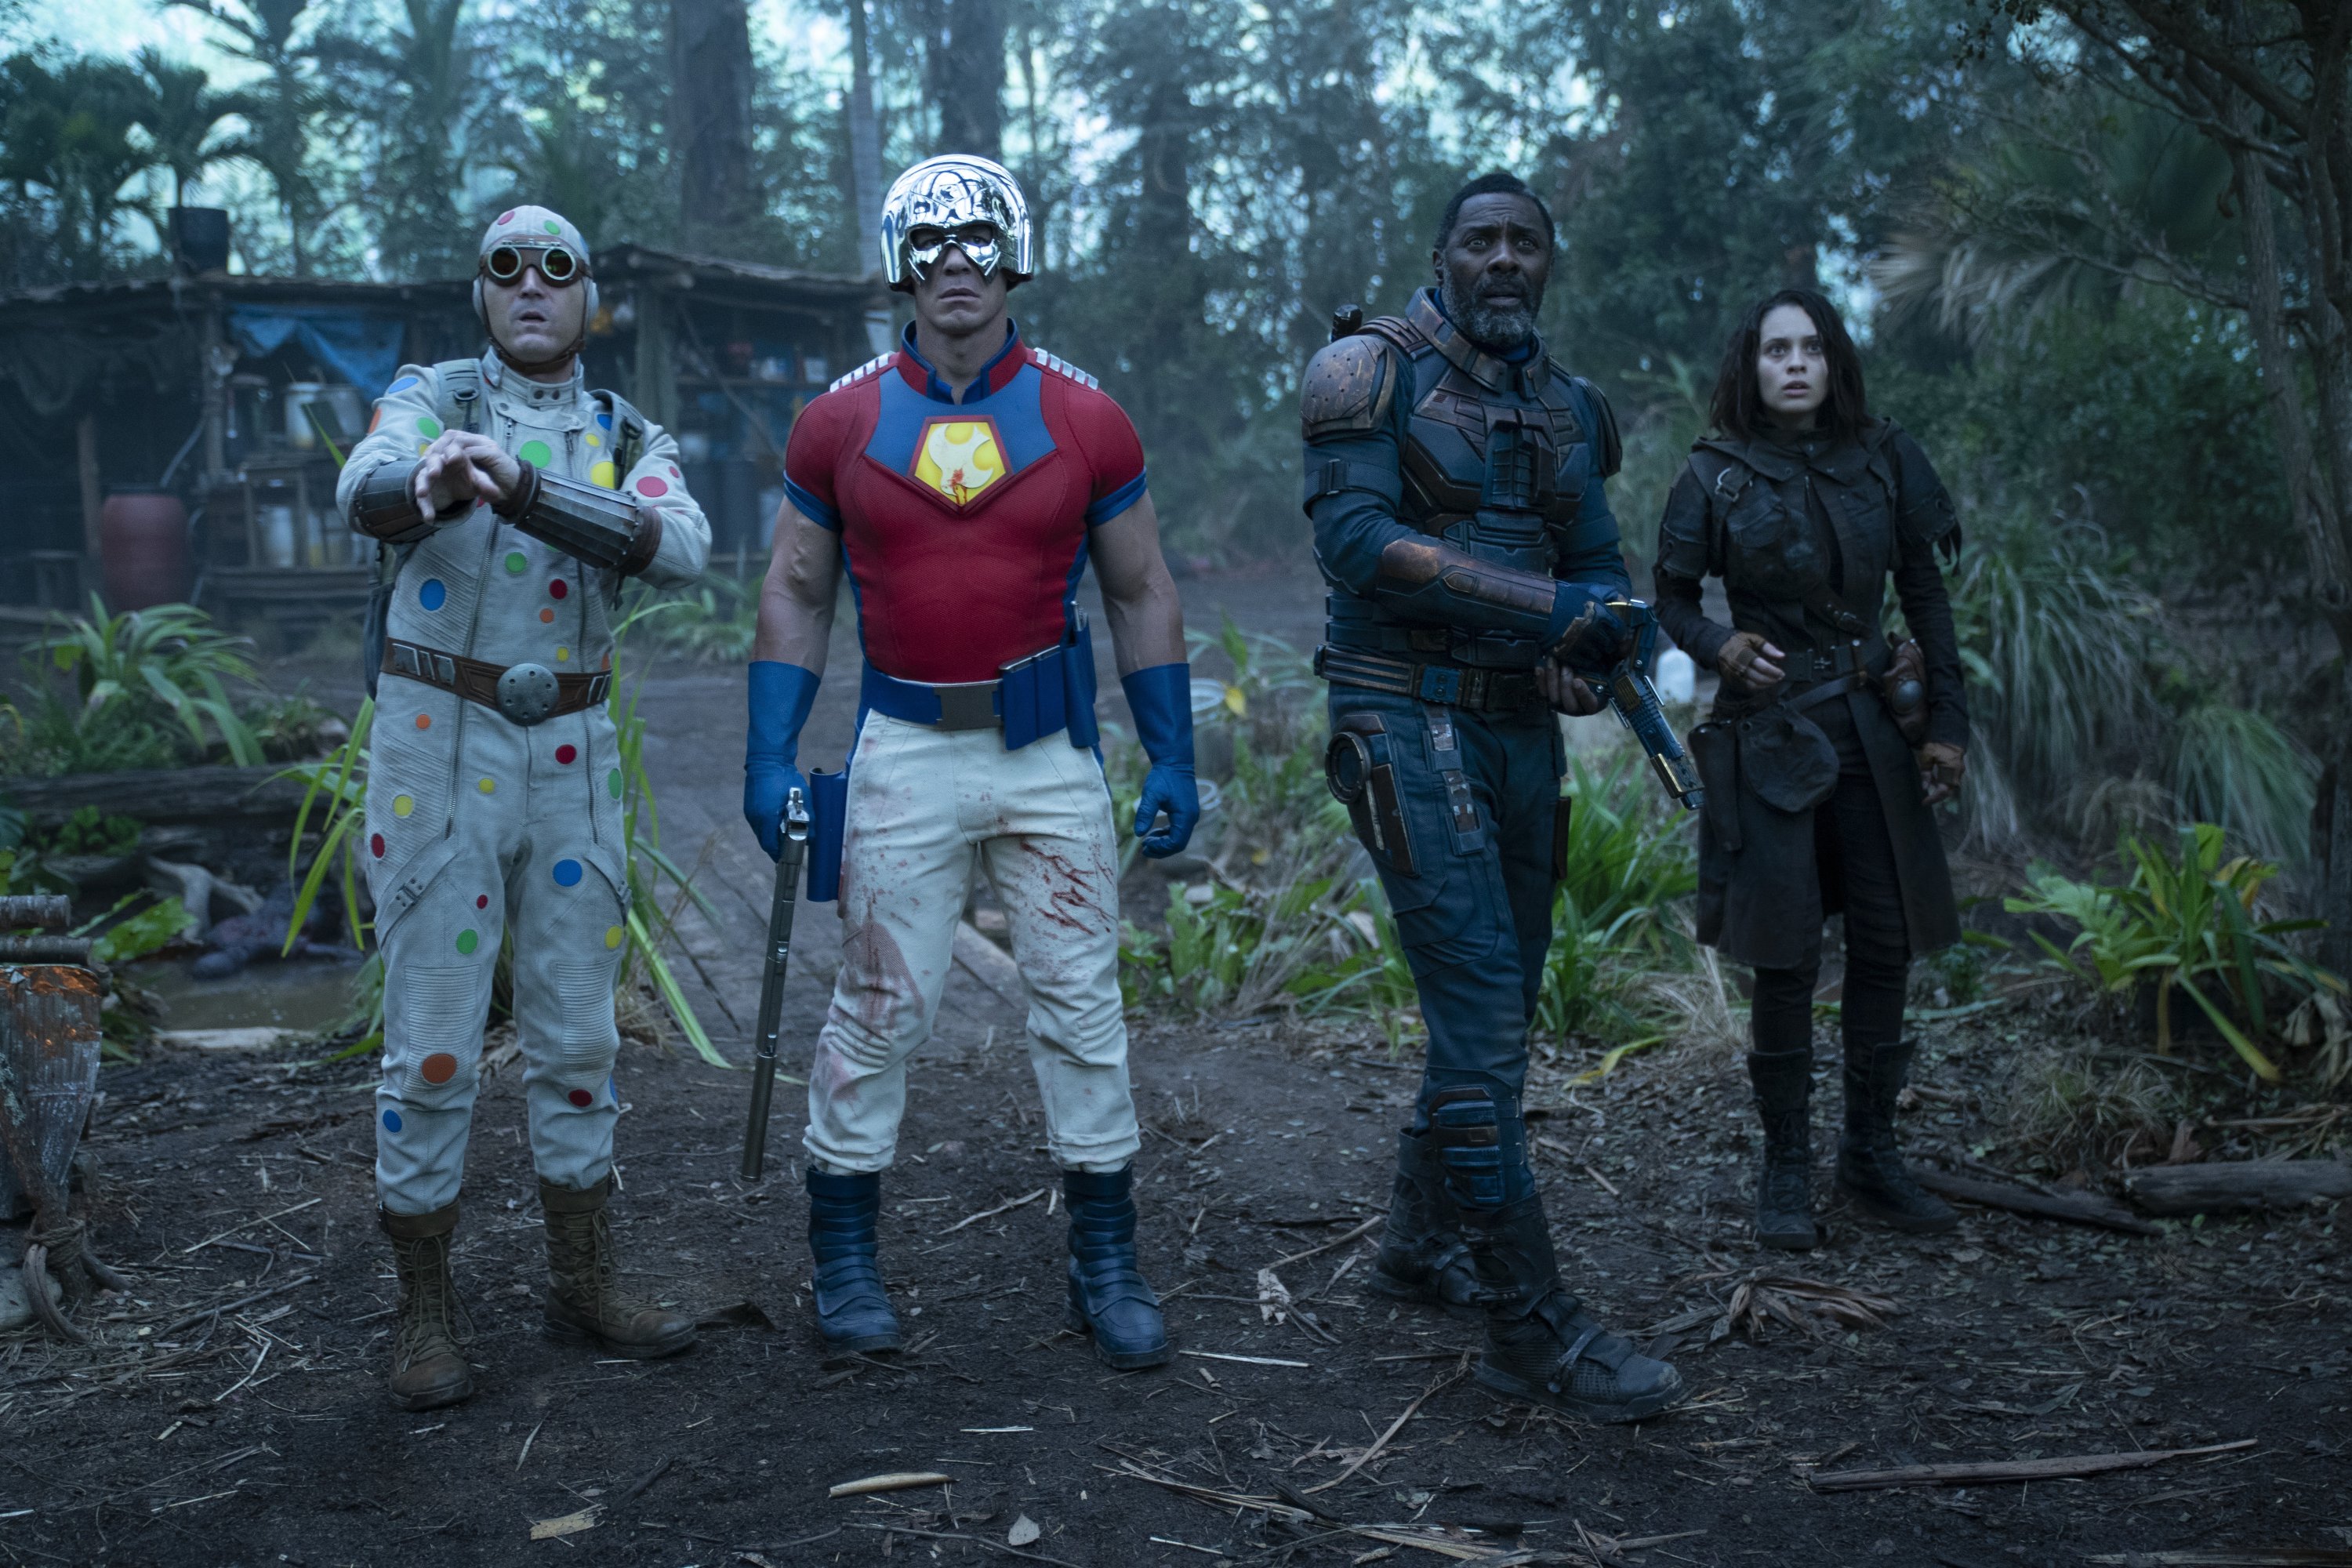 This image provided by Warner Bros. Pictures shows, from left, David Dastmalchian, John Cena, Idris Elba and Daniela Melchior in a scene from "The Suicide Squad." (Jessica Miglio/Warner Bros. Pictures via AP)